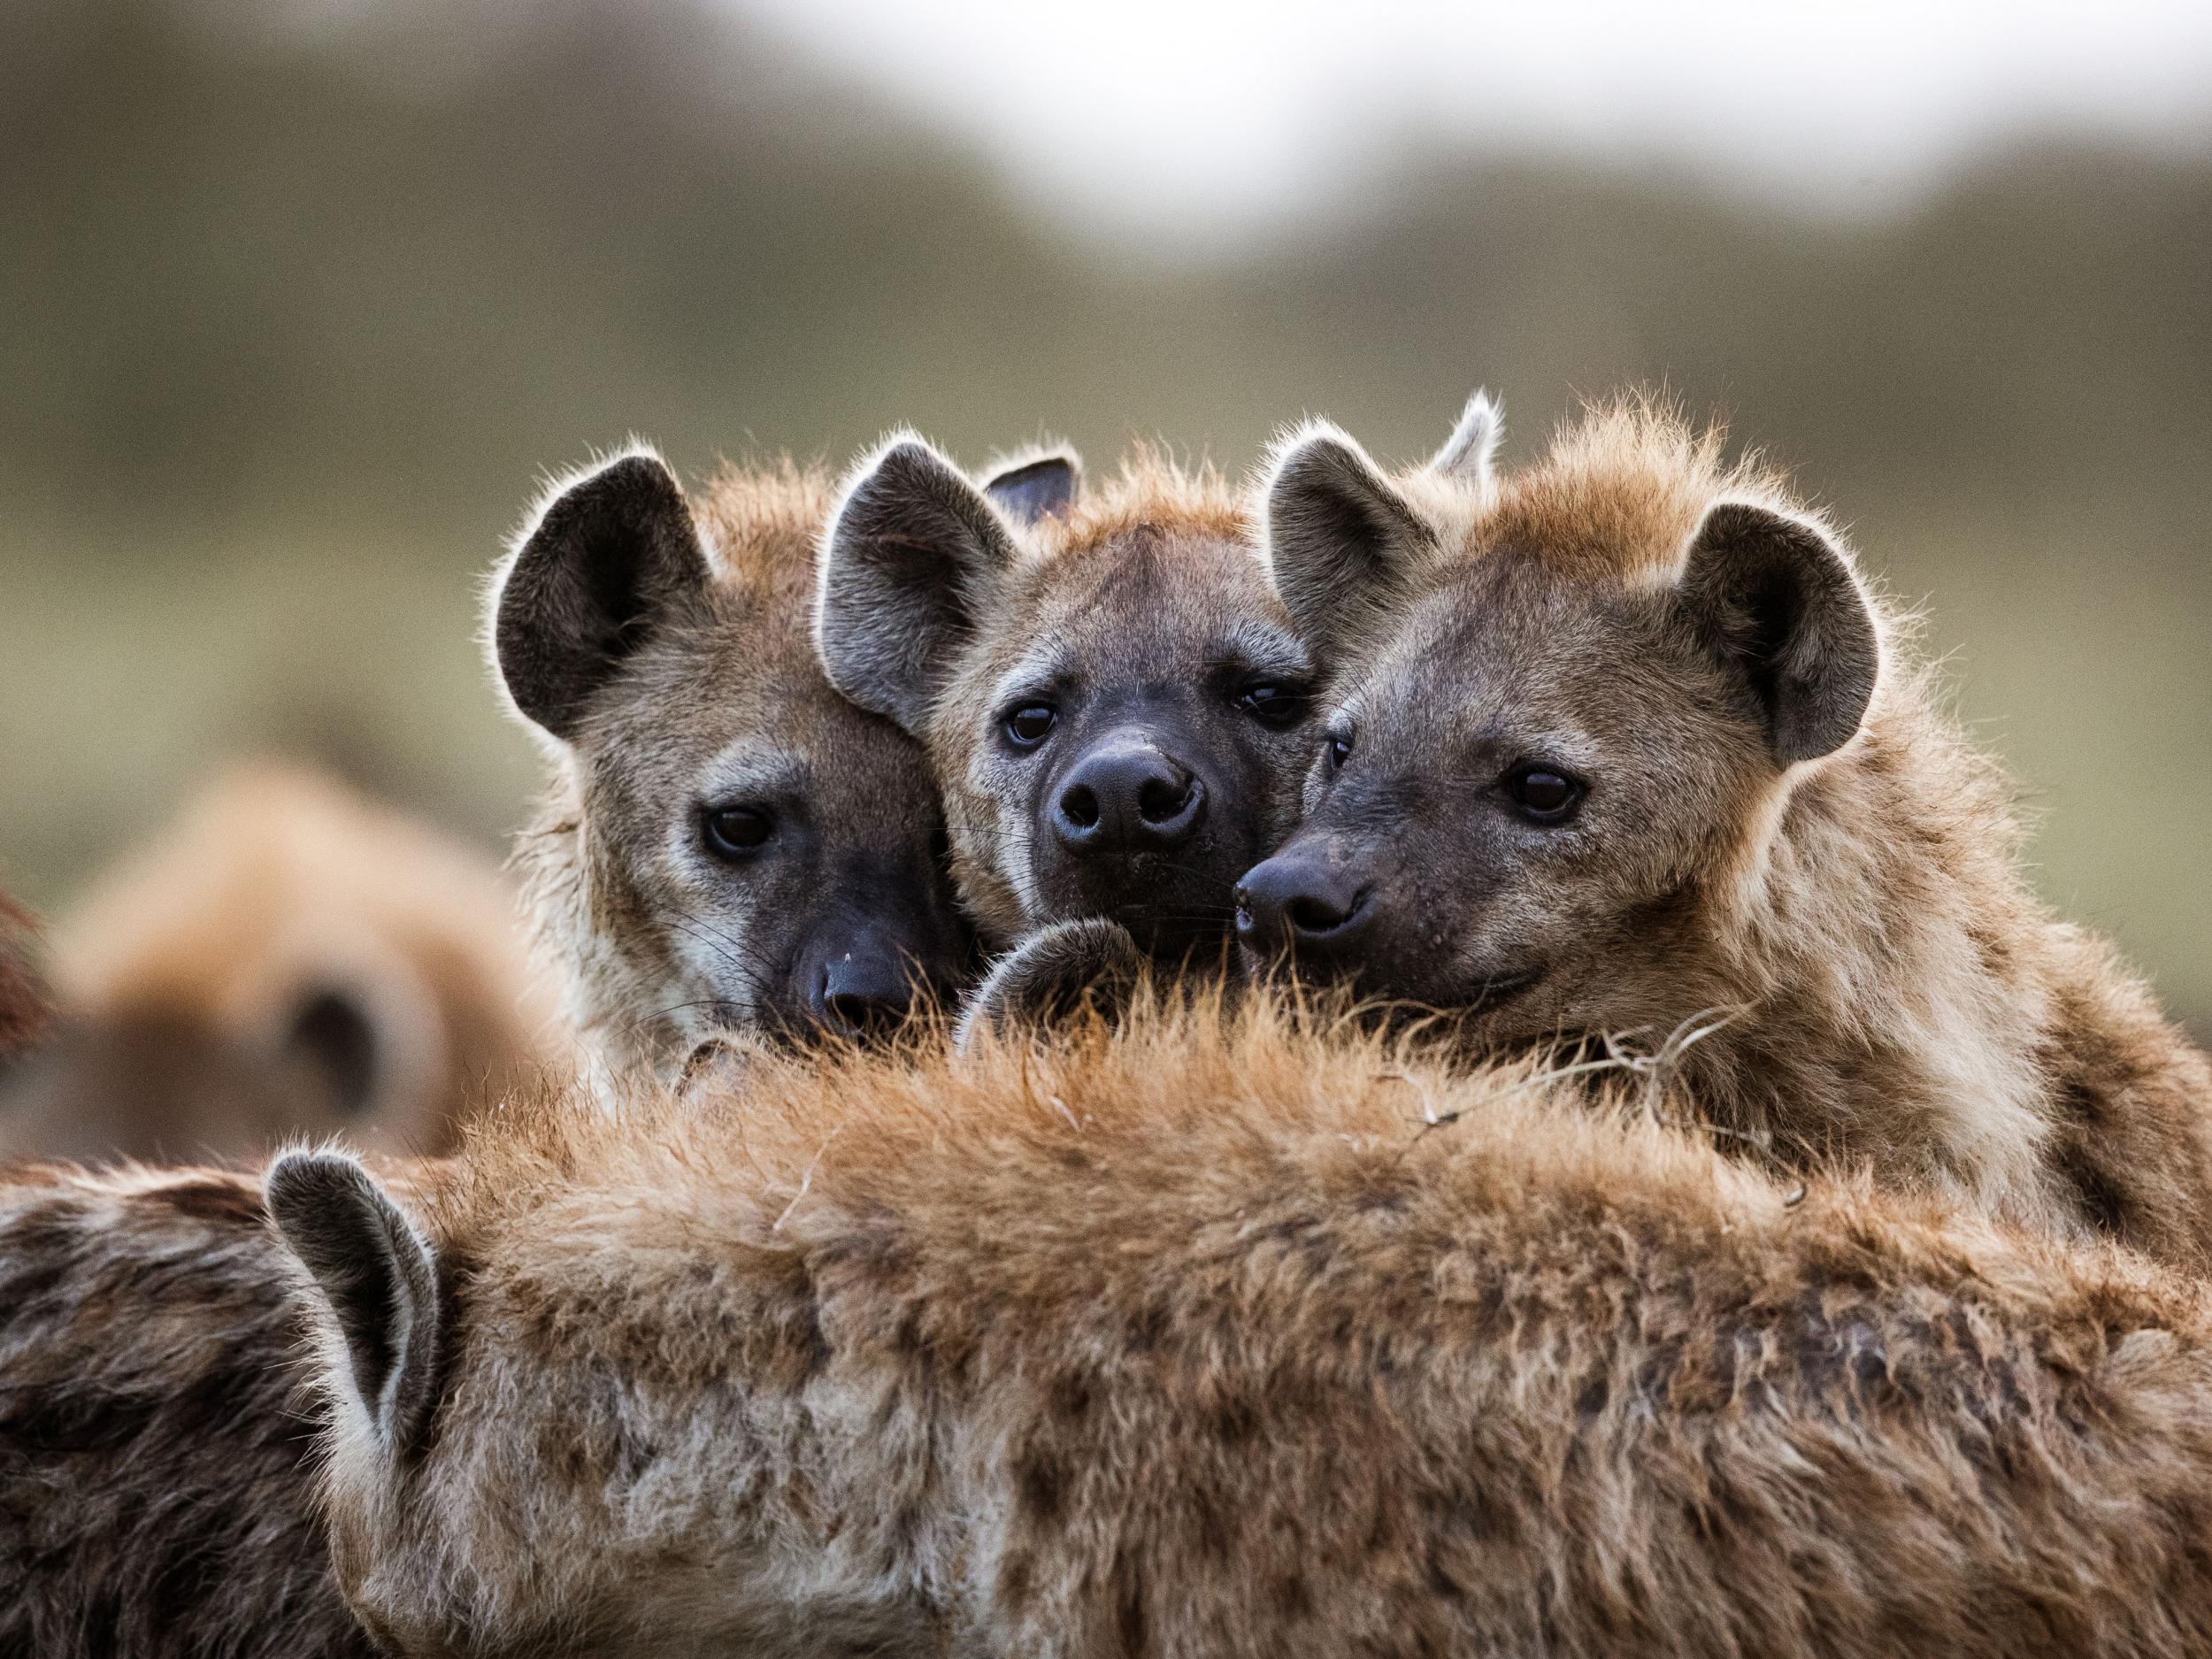 There’s thought to only be a few hundred striped hyenas left in Lebanon